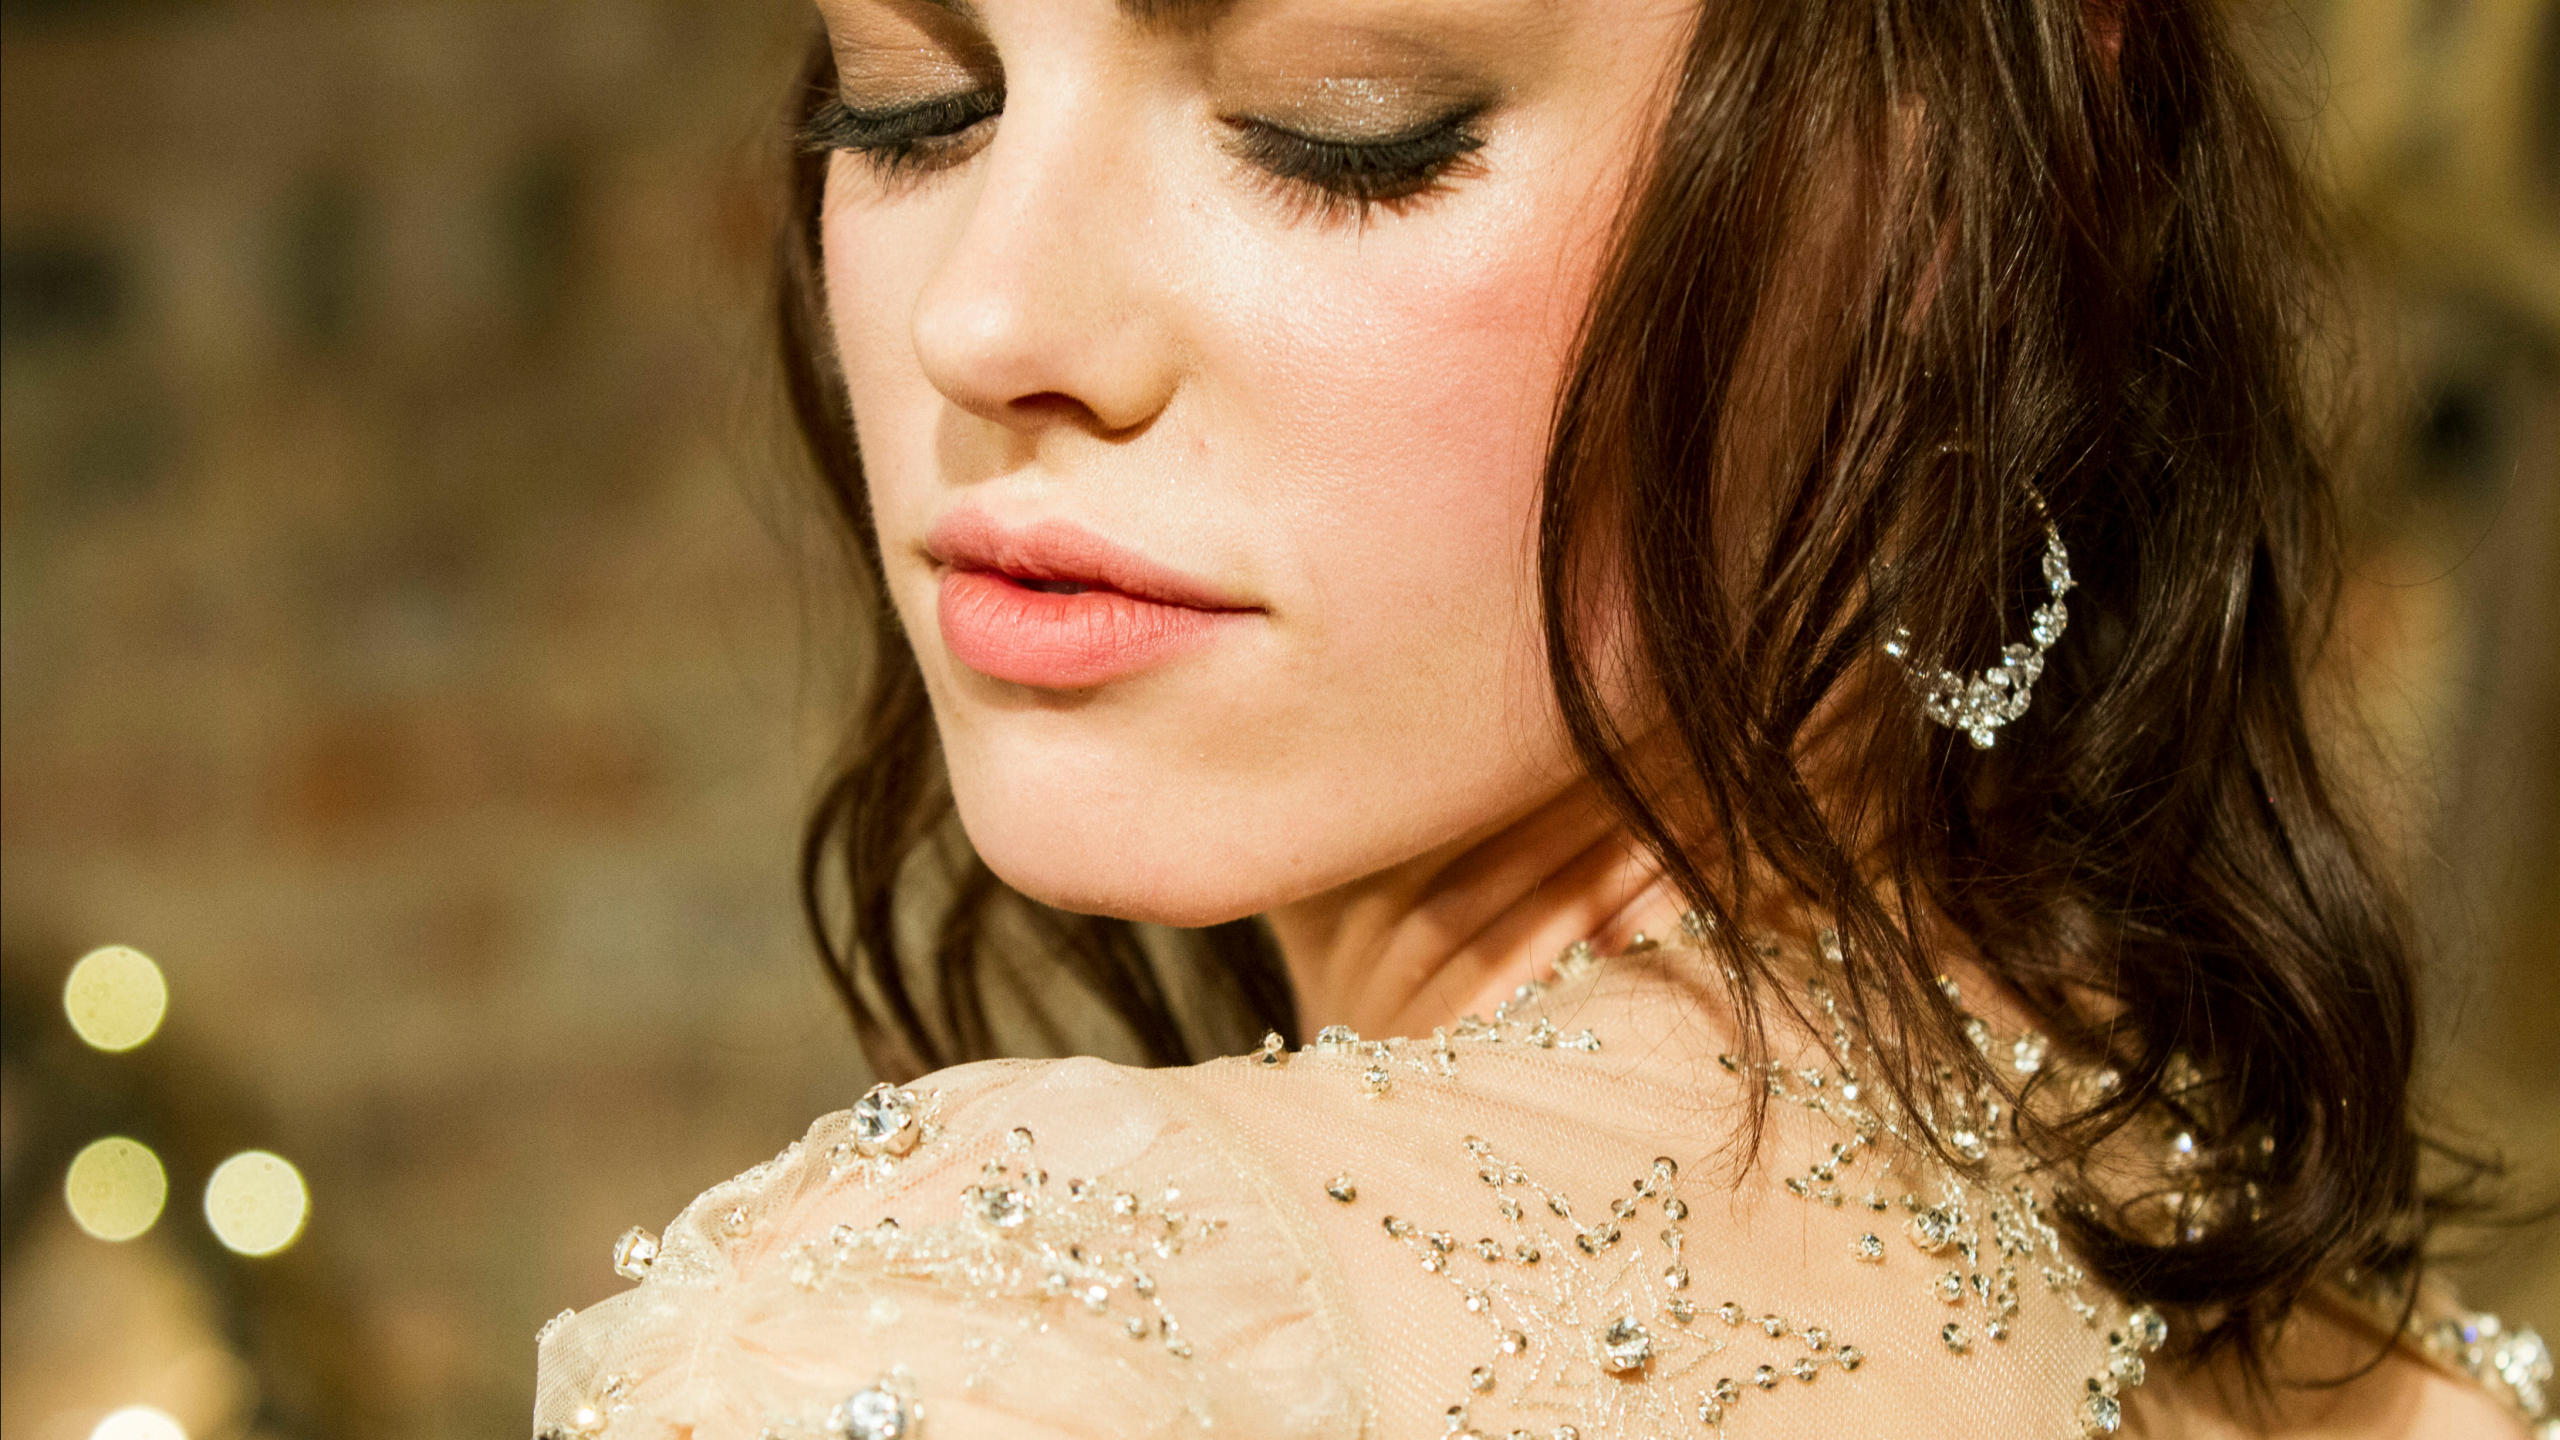 Makeup Artist For Weddings
 The Best Advice for When You Book Your Wedding Makeup